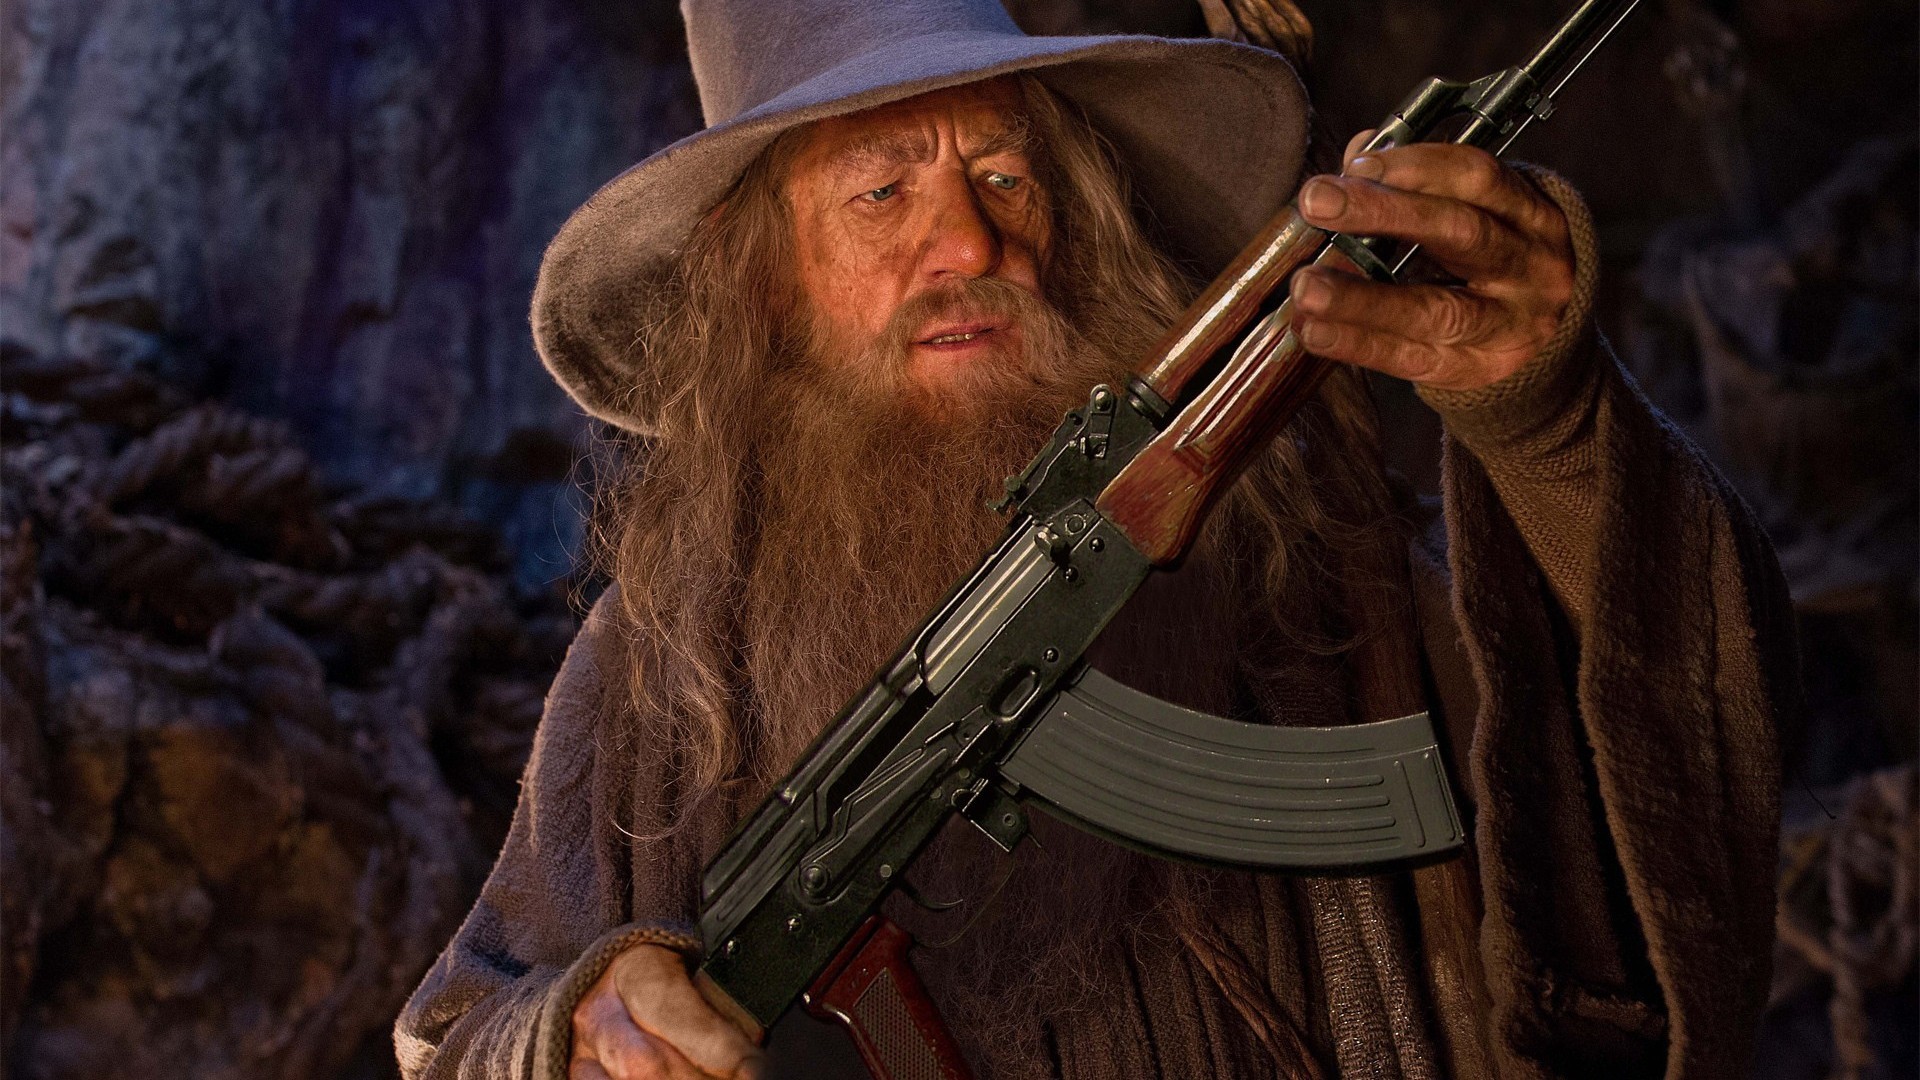 The Lord Of The Rings Gandalf Photo Manipulation Humor AKM 1920x1080